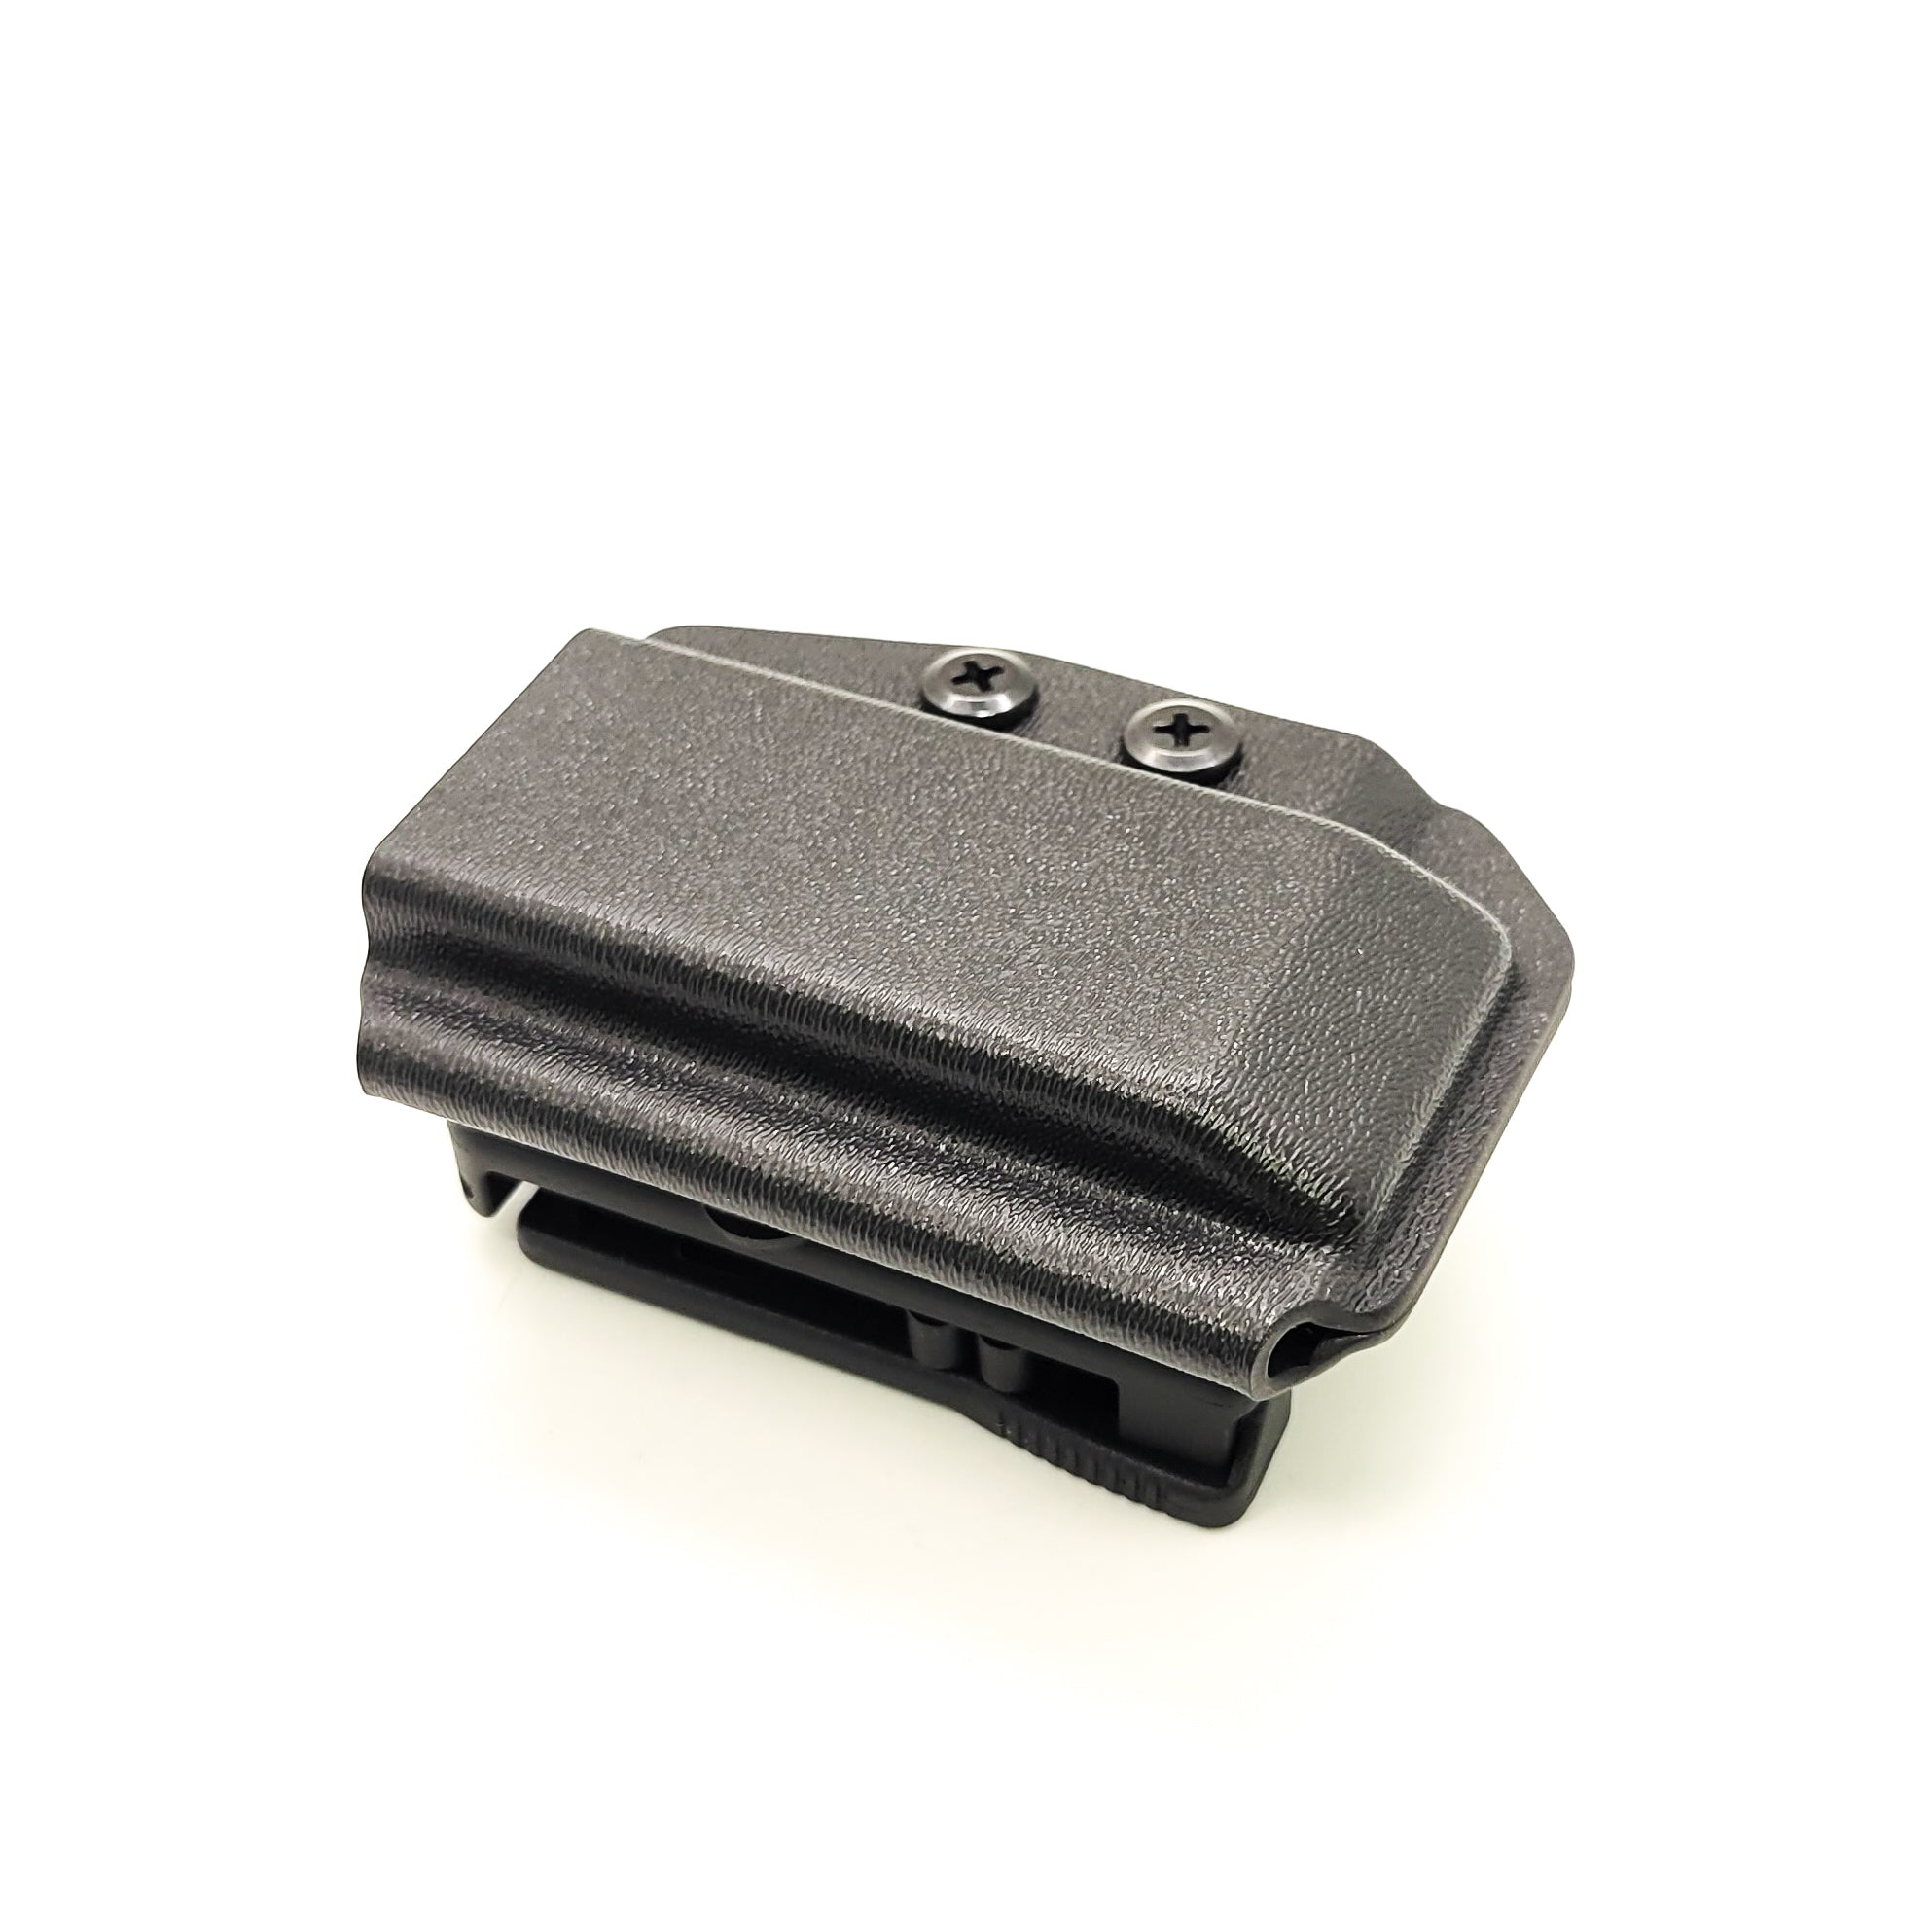 For the best, most comfortable, and rugged Kydex OWB Outside Waistband magazine pouch for Glock 9mm and 40 shop Four Brothers Holsters.  Suitable for belt widths of 1 1/2", 1 3/4". 2" & 2 1/2" Adjustable retention and cant outside waist carrier holster Sig P320, Glock 9mm & 40, Ruger, Walther, Smith & Wesson, FN